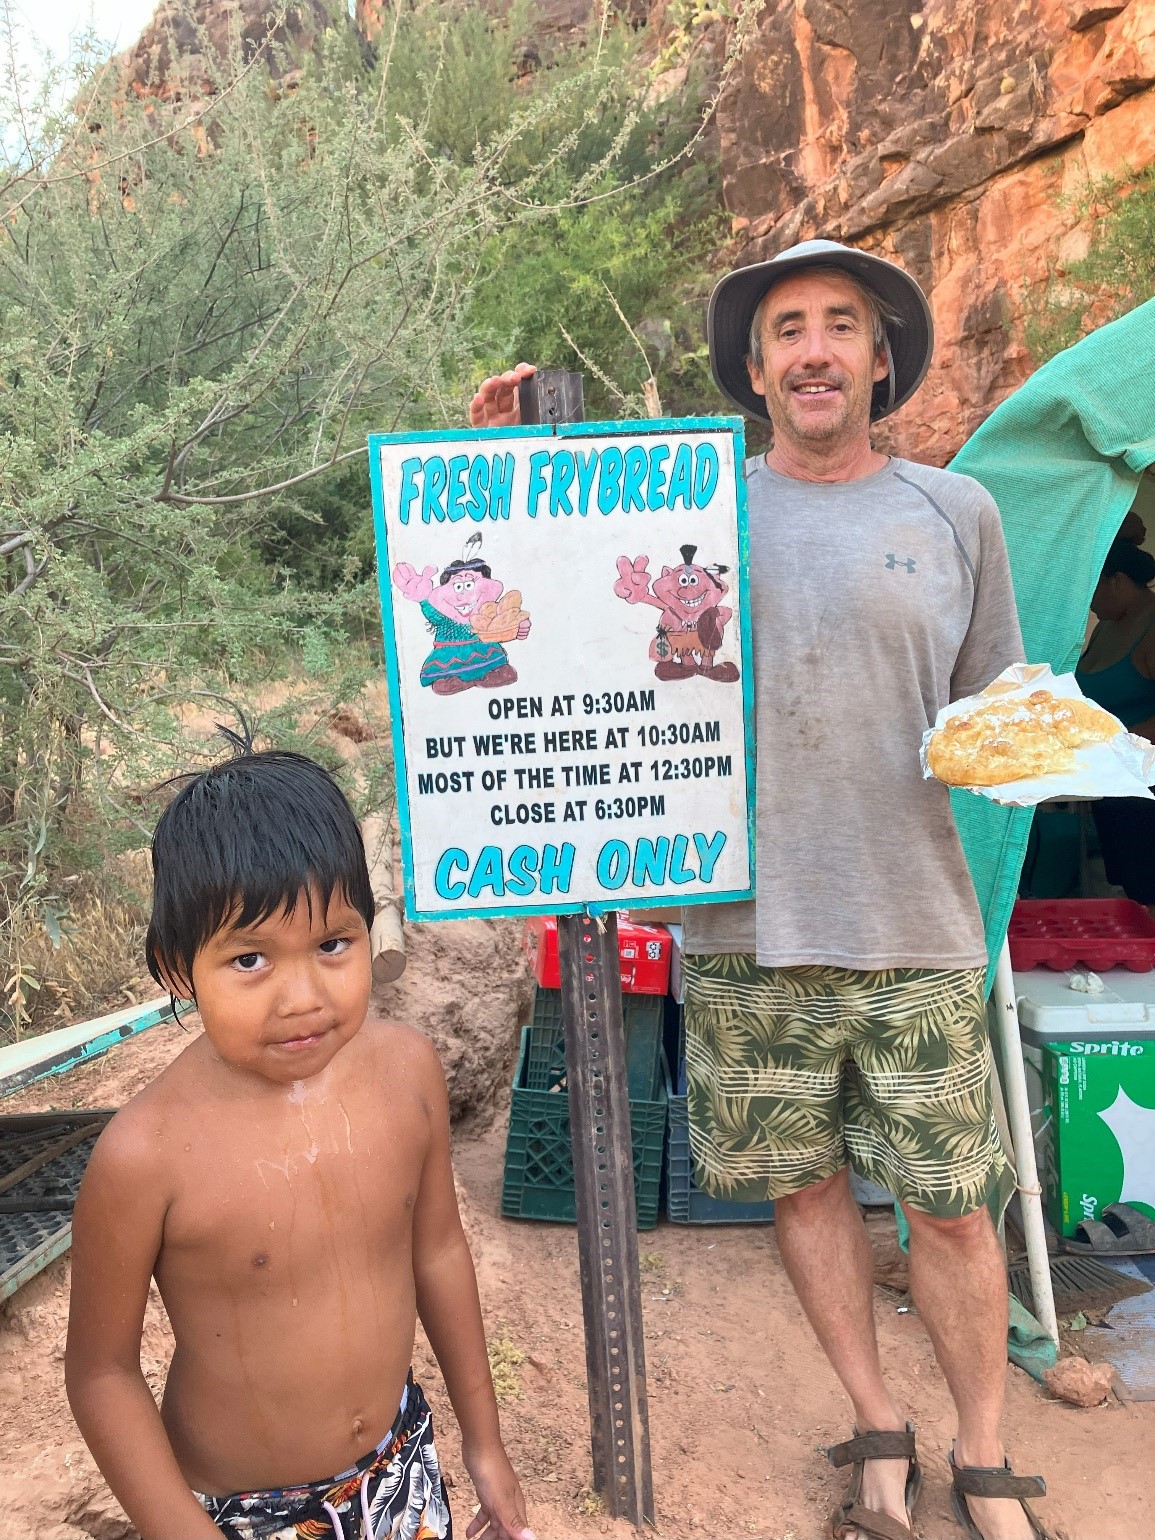 This is the fry-bread stand just above Havasupai Falls